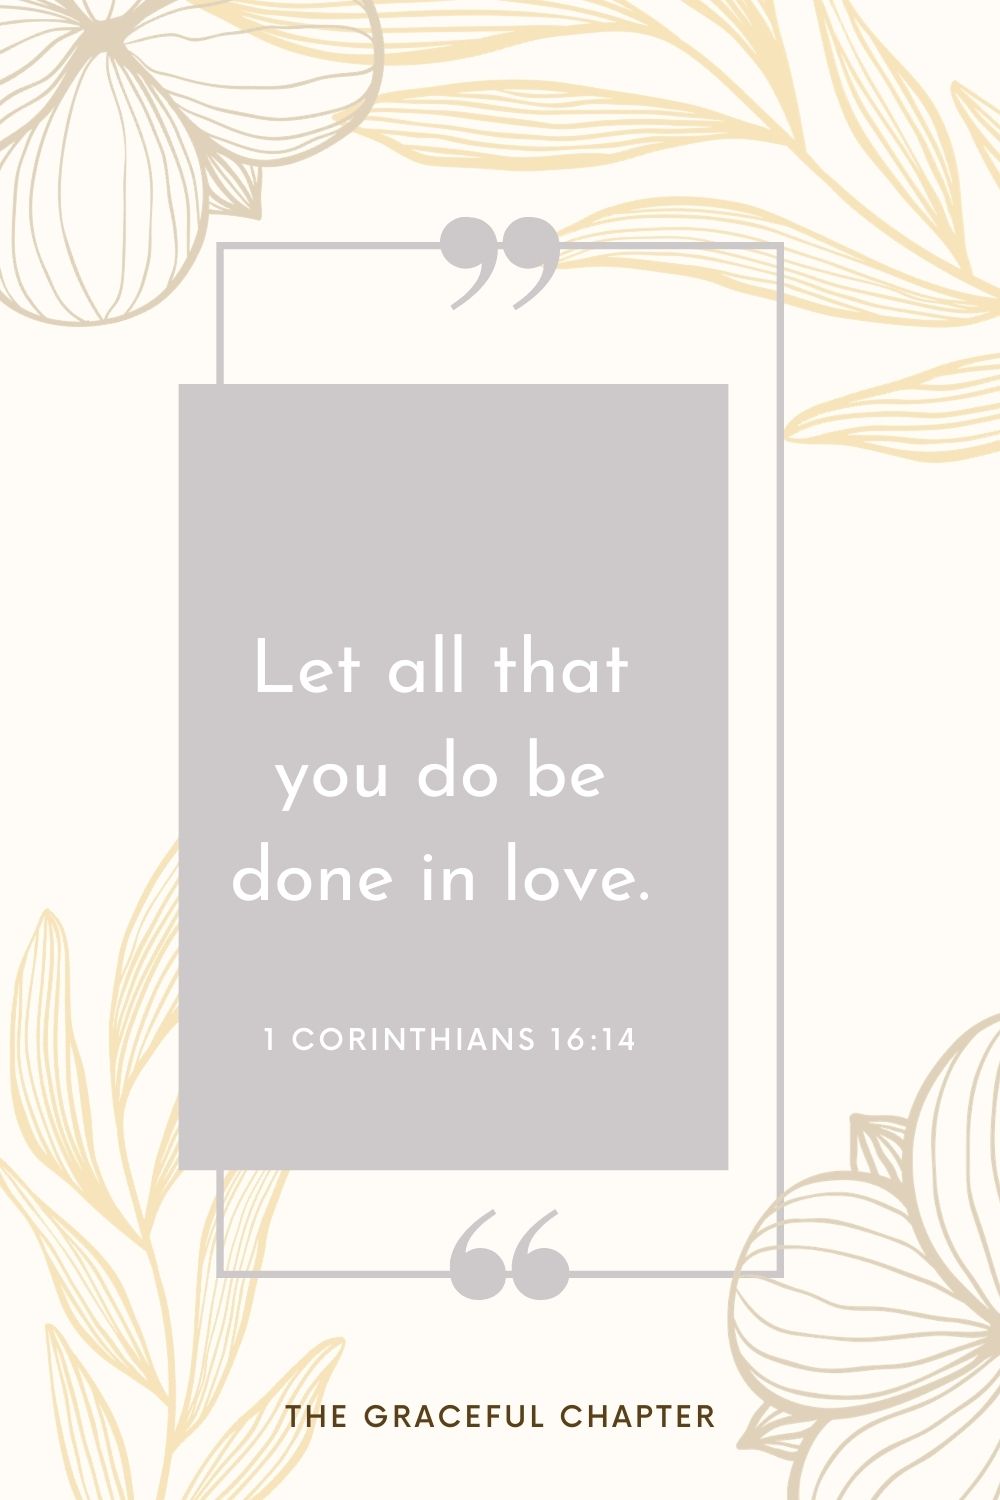 Let all that you do be done in love. 1 Corinthians 16:14